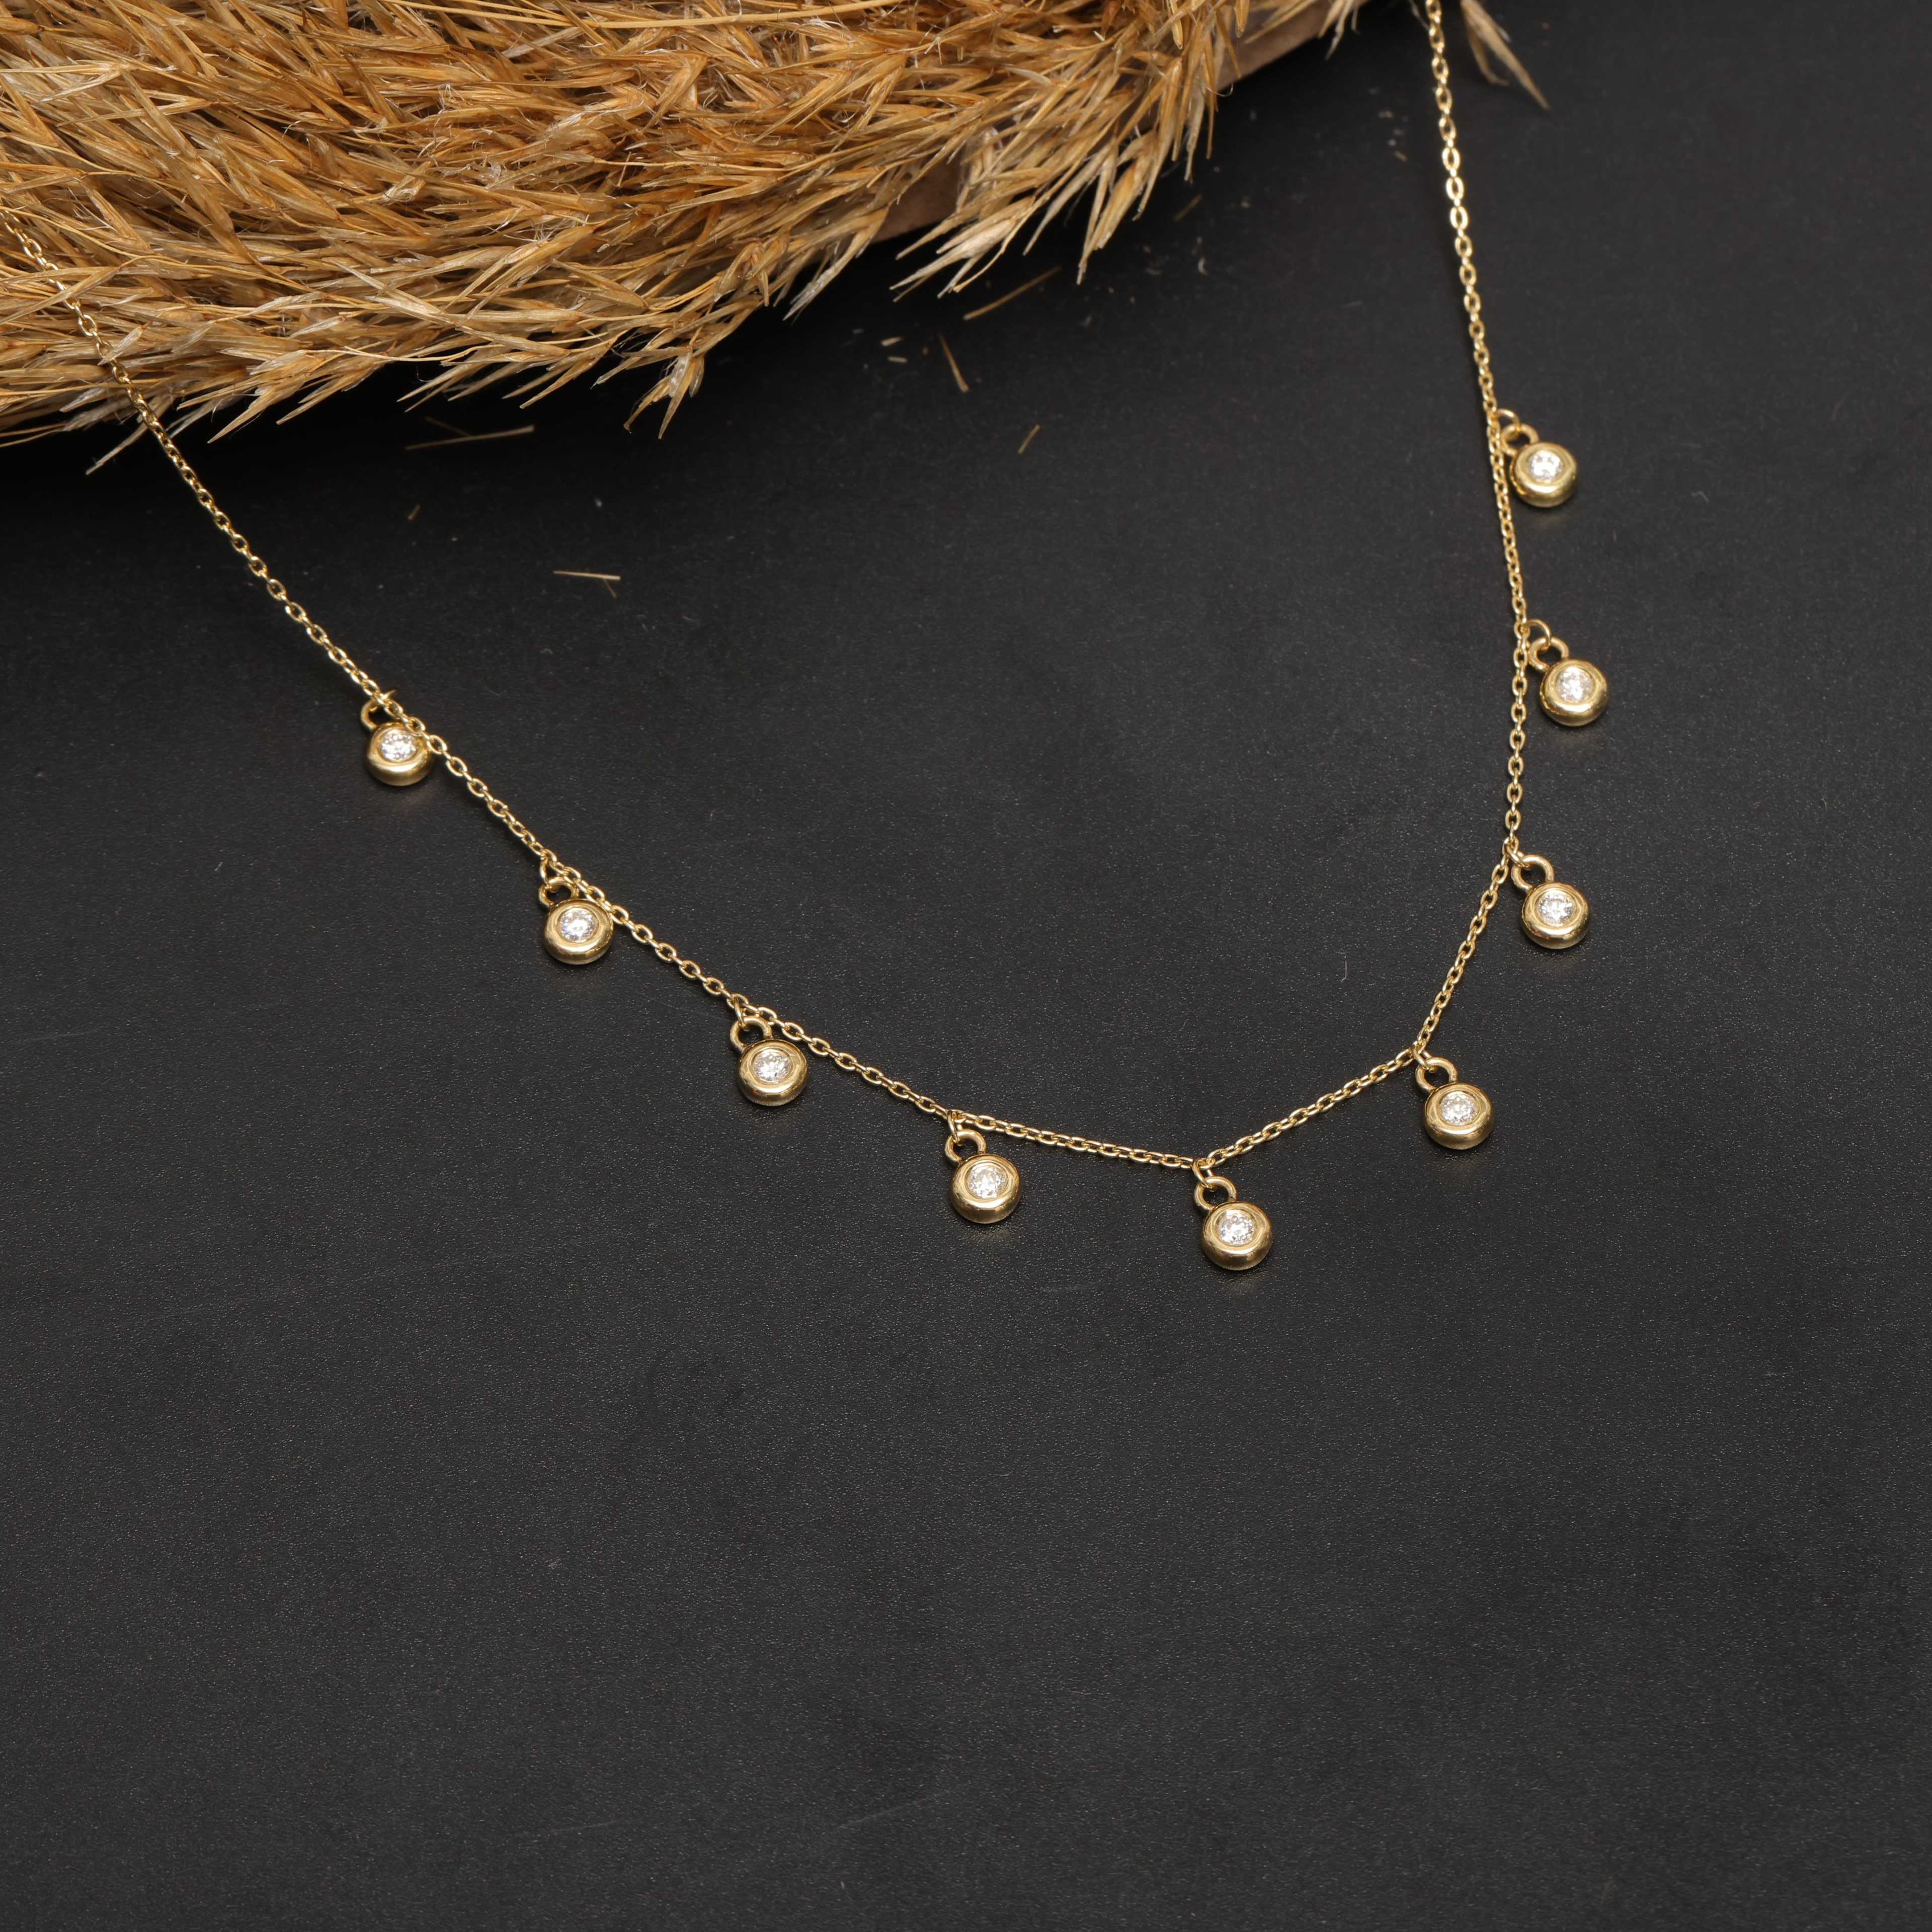 Elegant Necklace with Gold and Diamond Stones